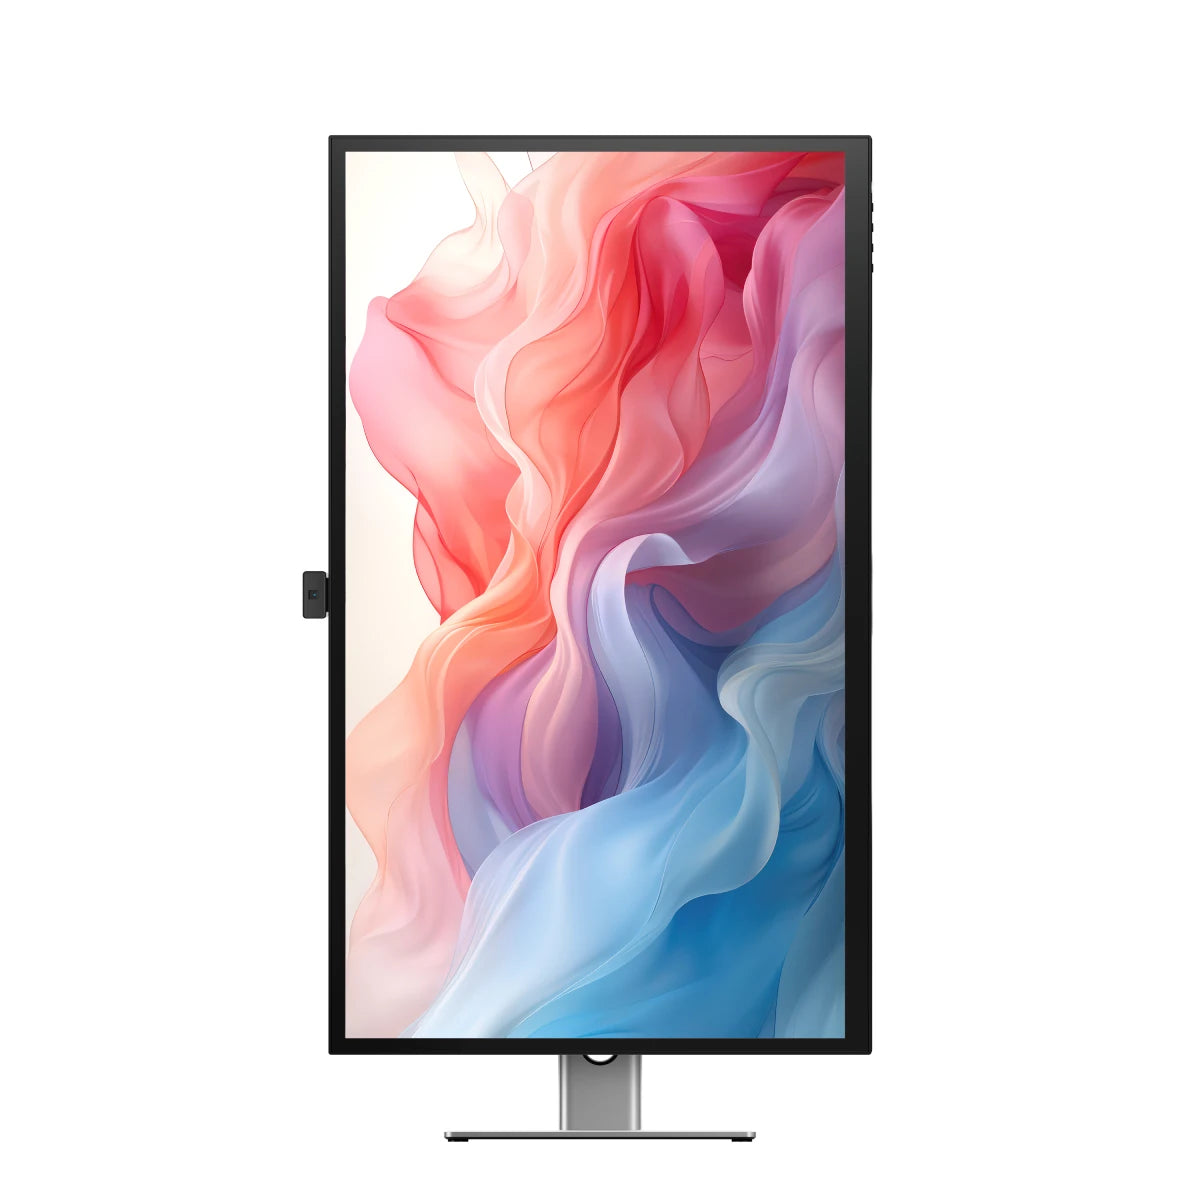 Clarity Max Touch 32" UHD 4K Monitor with USB-C Power Delivery, Webcam and Touch Screen